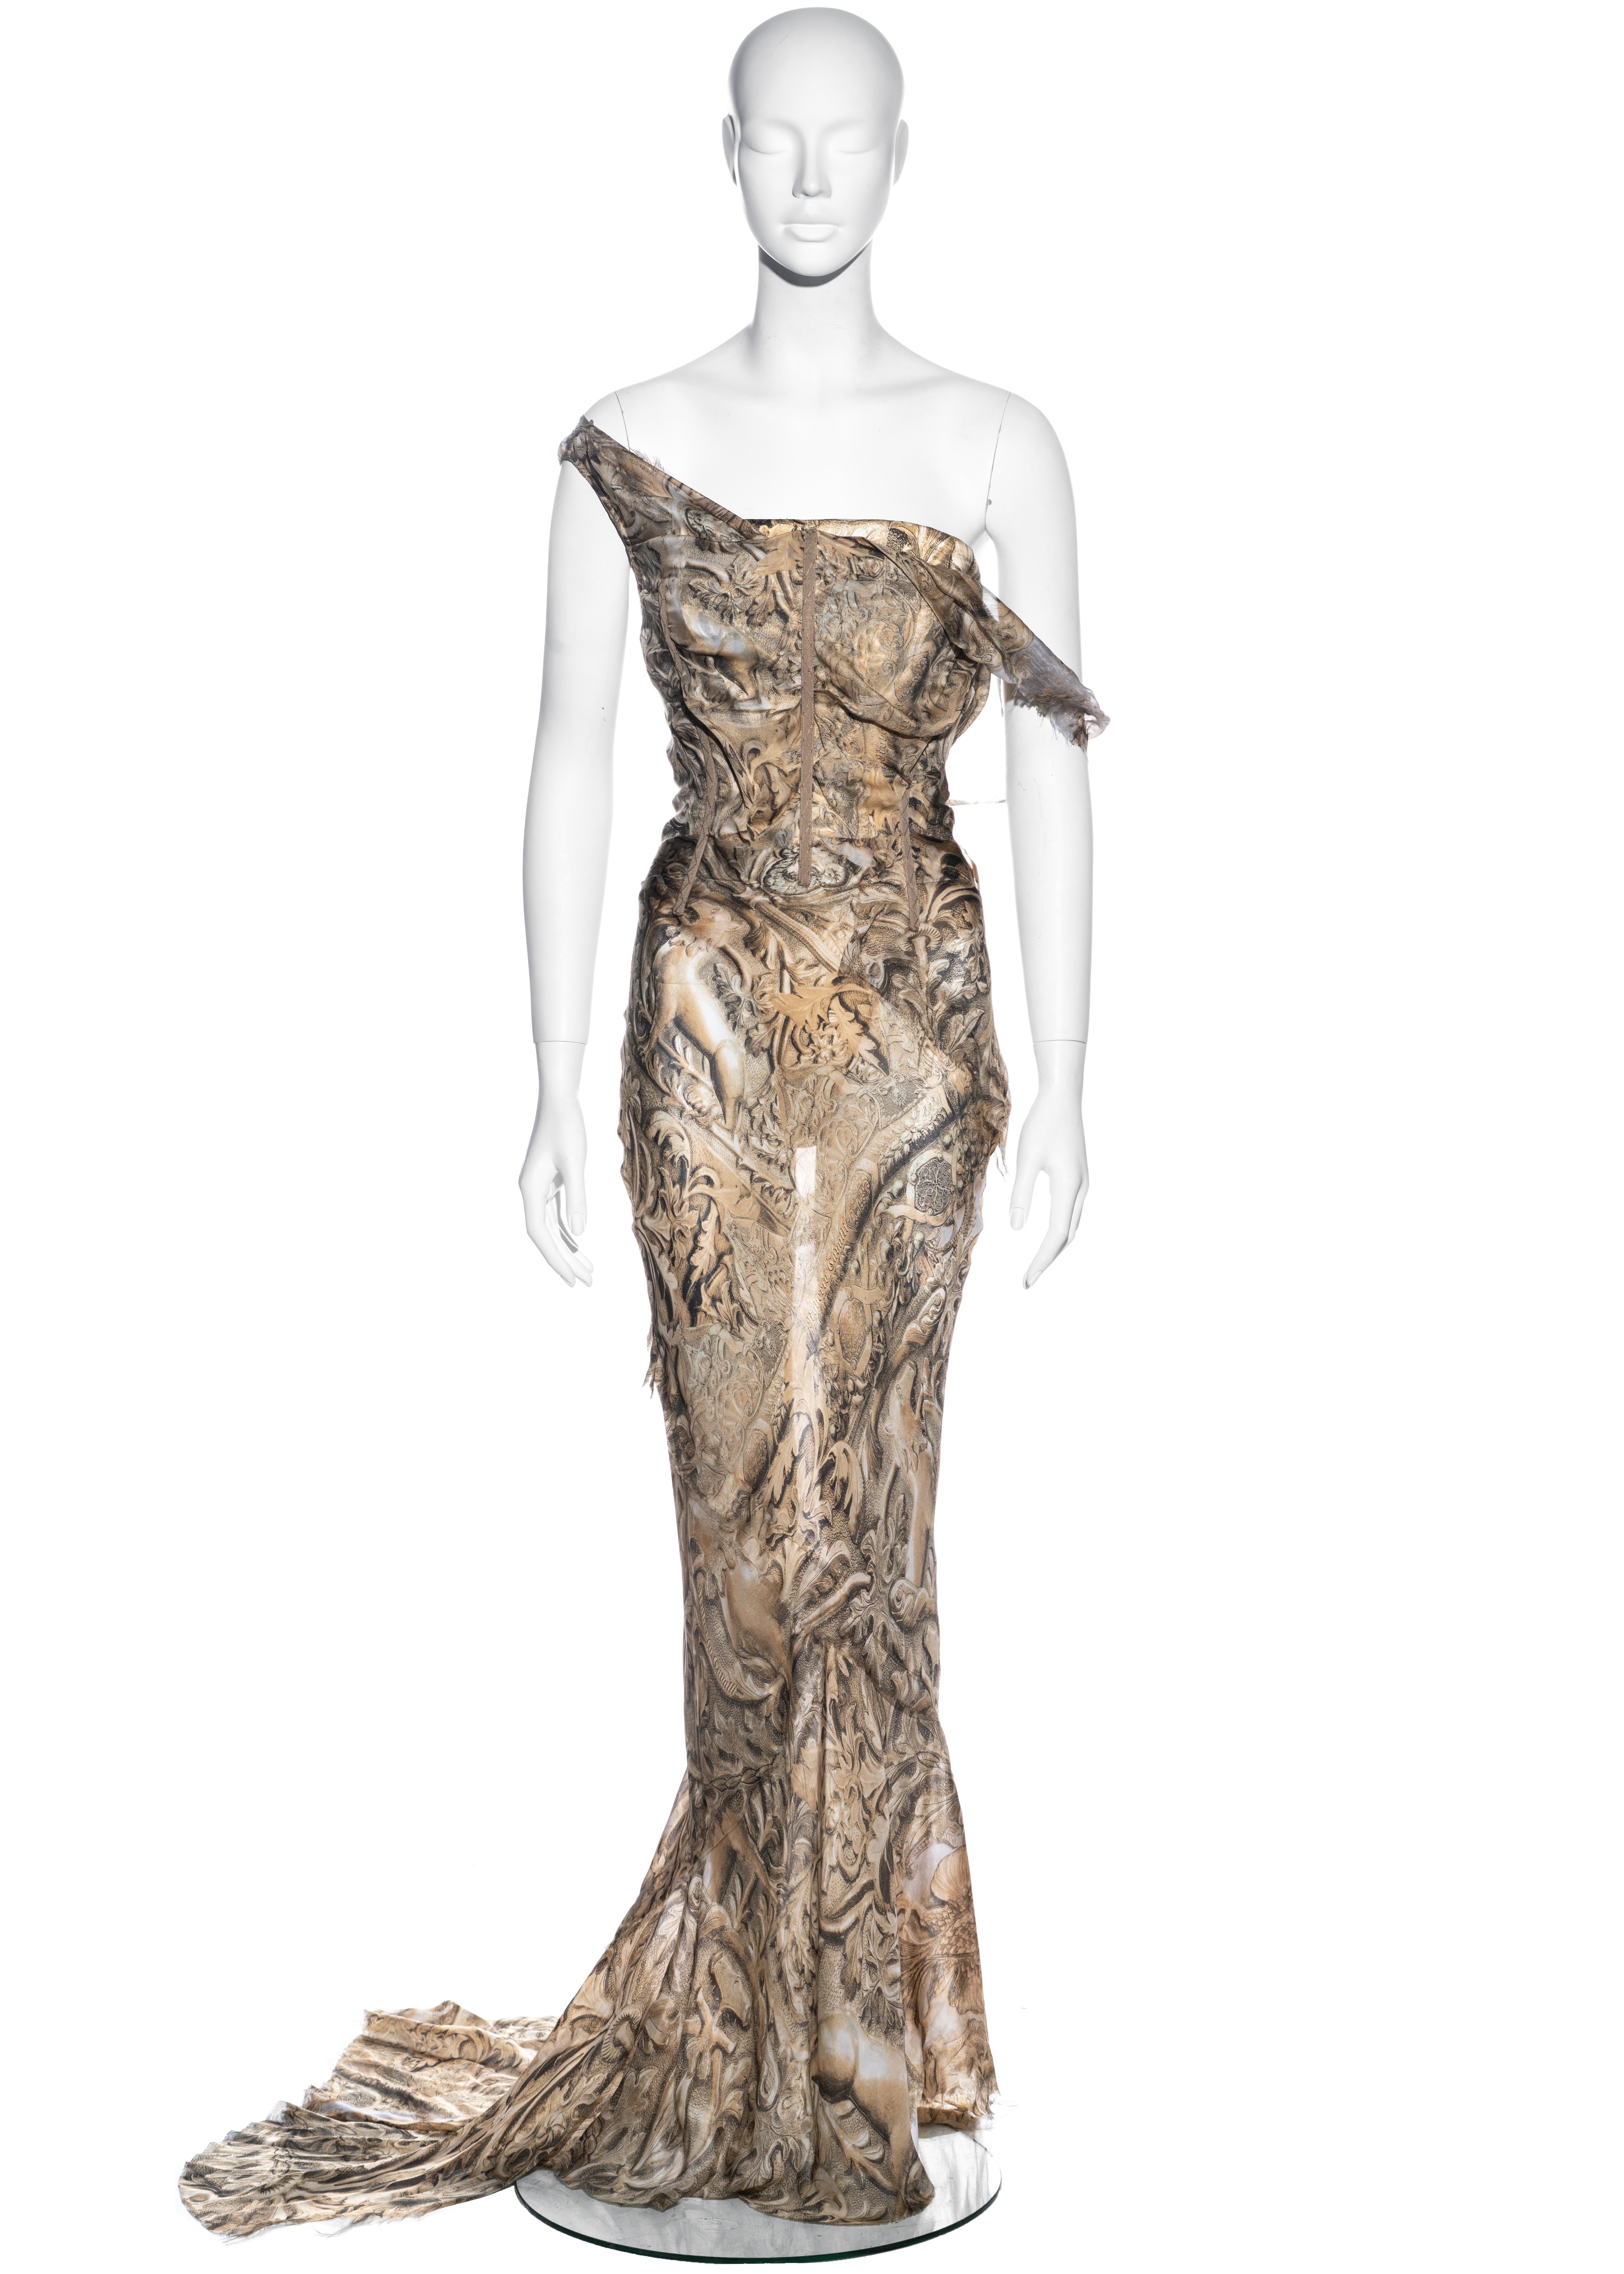 ▪ Roberto Cavalli printed silk evening dress
▪ 100% Silk
▪ Corseted bodice with external boning 
▪ Raw edges 
▪ Built-in bodysuit 
▪ Size Extra Small 
▪ Fall-Winter 2001